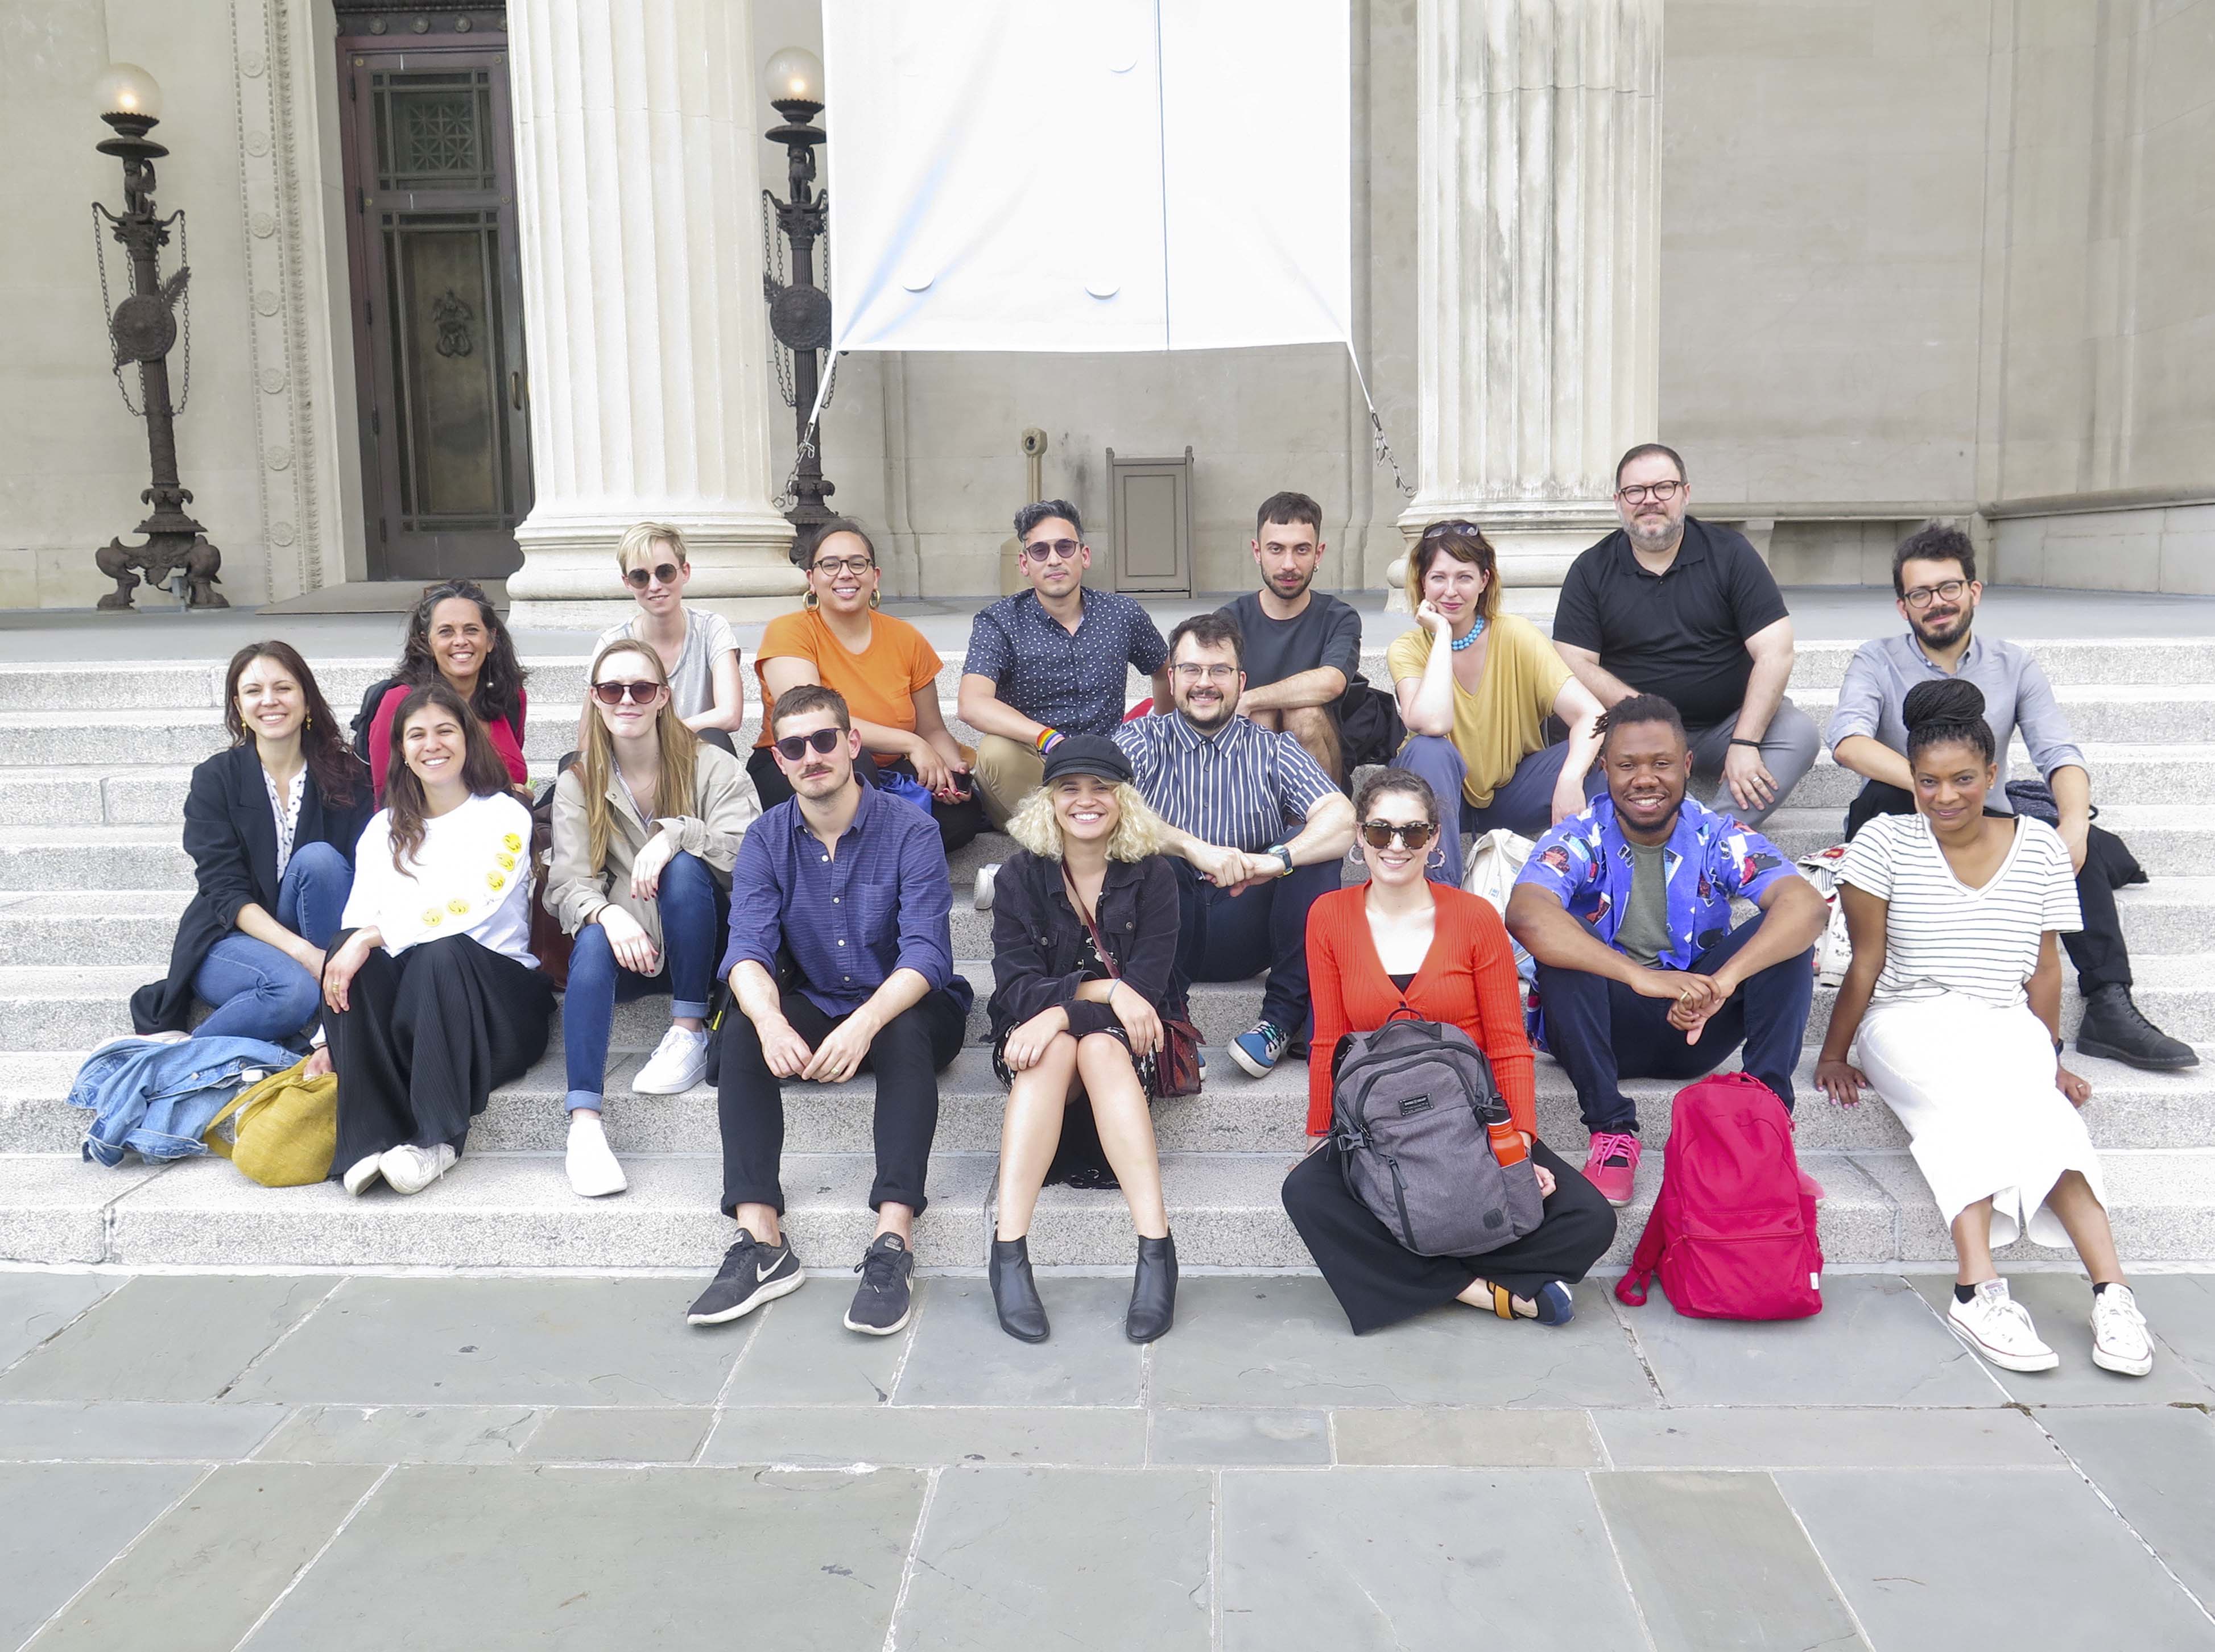  Photos from the 2019 Curatorial Intensive in New Orleans